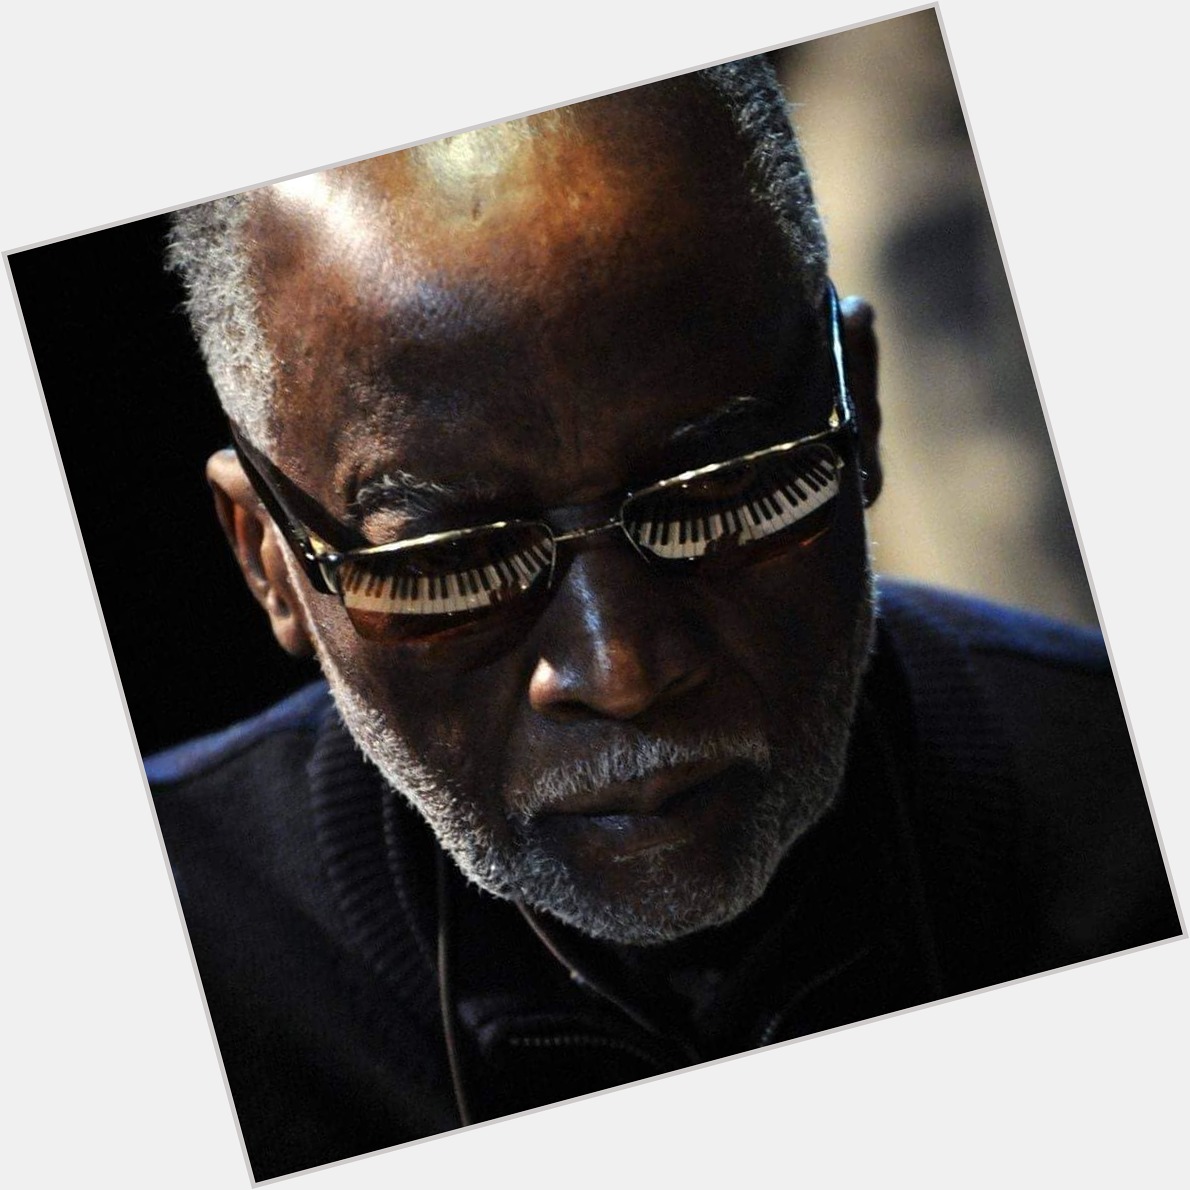 Happy Birthday to the great Ahmad Jamal who turns 91 today
photo by Frank Stewart 